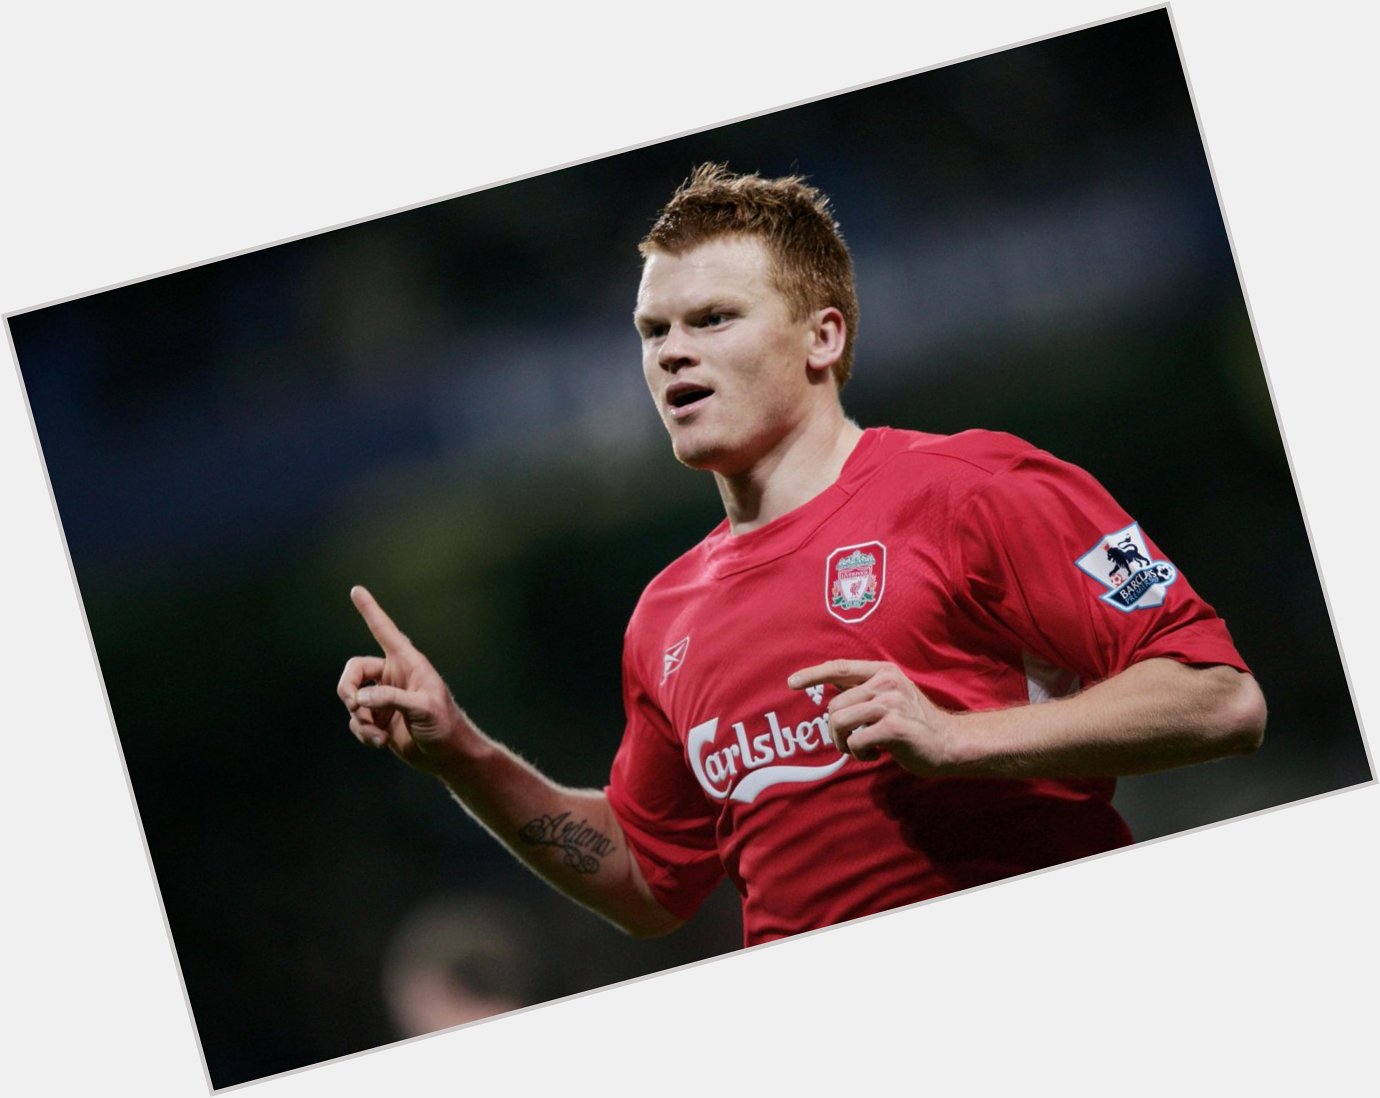 HAPPY BIRTHDAY - John Arne Riise turns 35 today. He will be playing for the Delhi Dynamos in 2015 tournament 